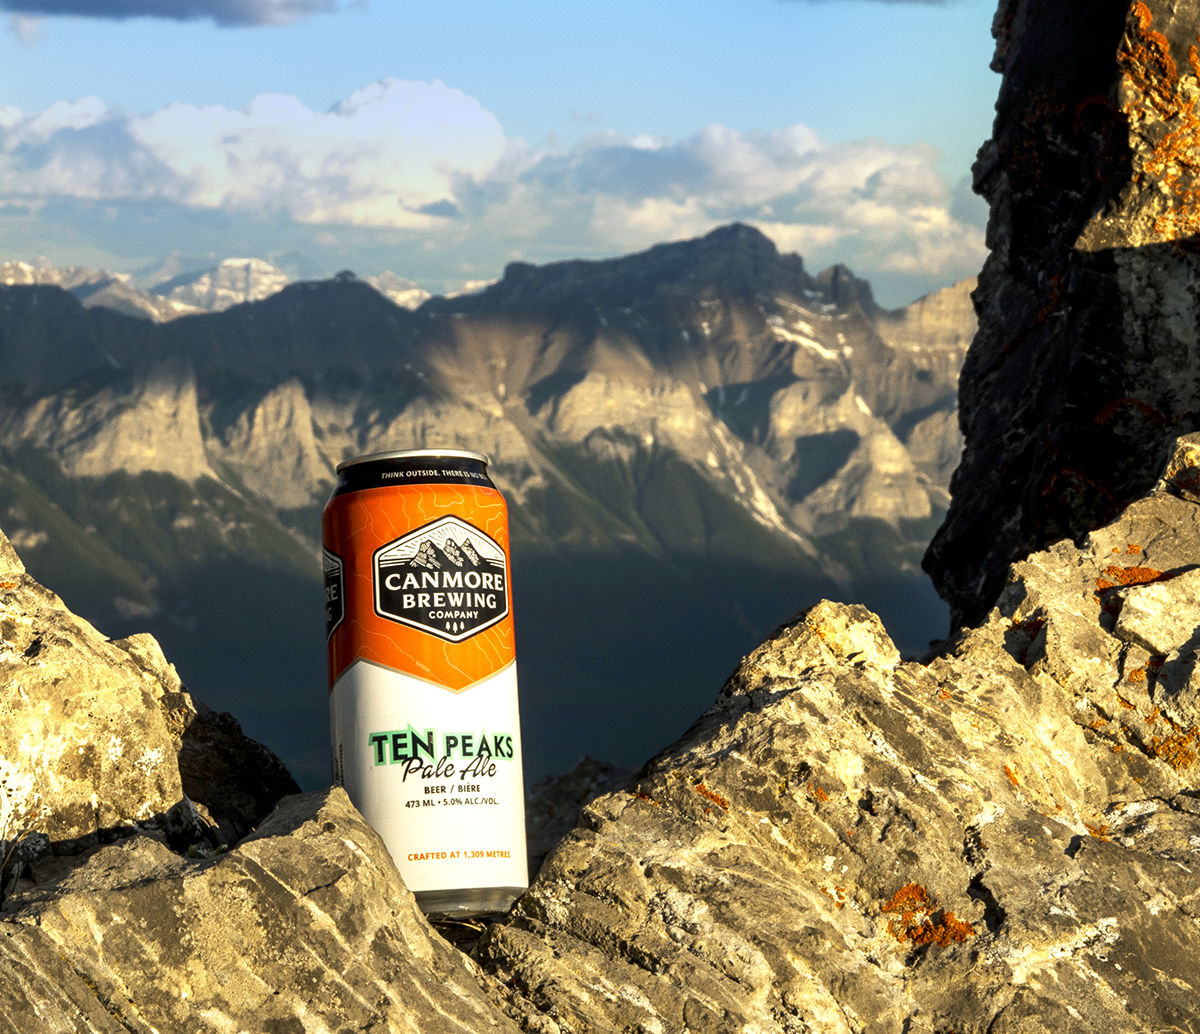 Canmore Brewing Pale ale on Grotto mountain